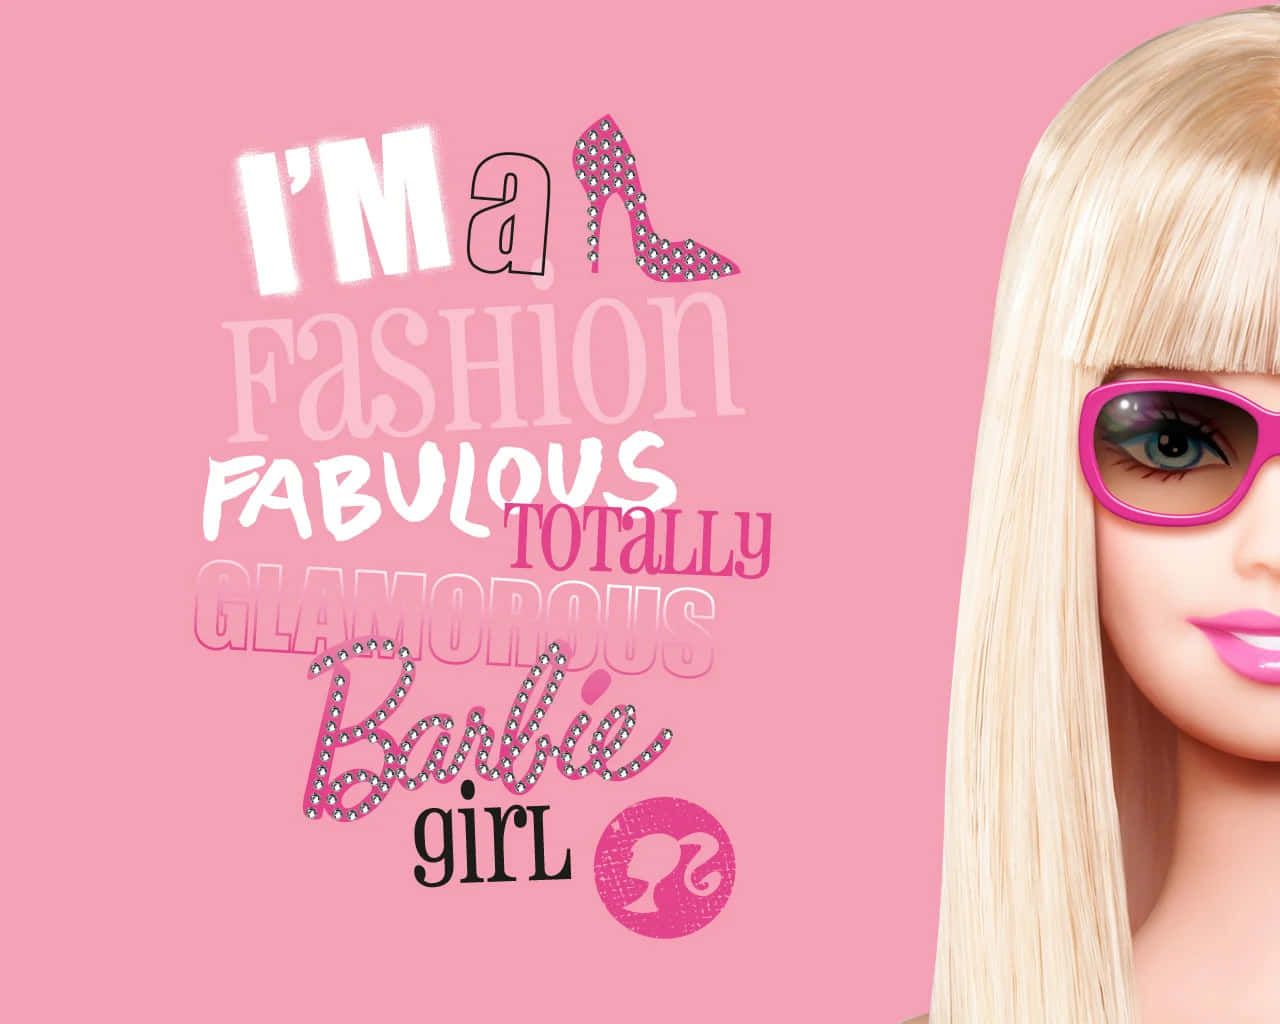 Barbie is a fashion doll that is popular among girls and women. - Barbie